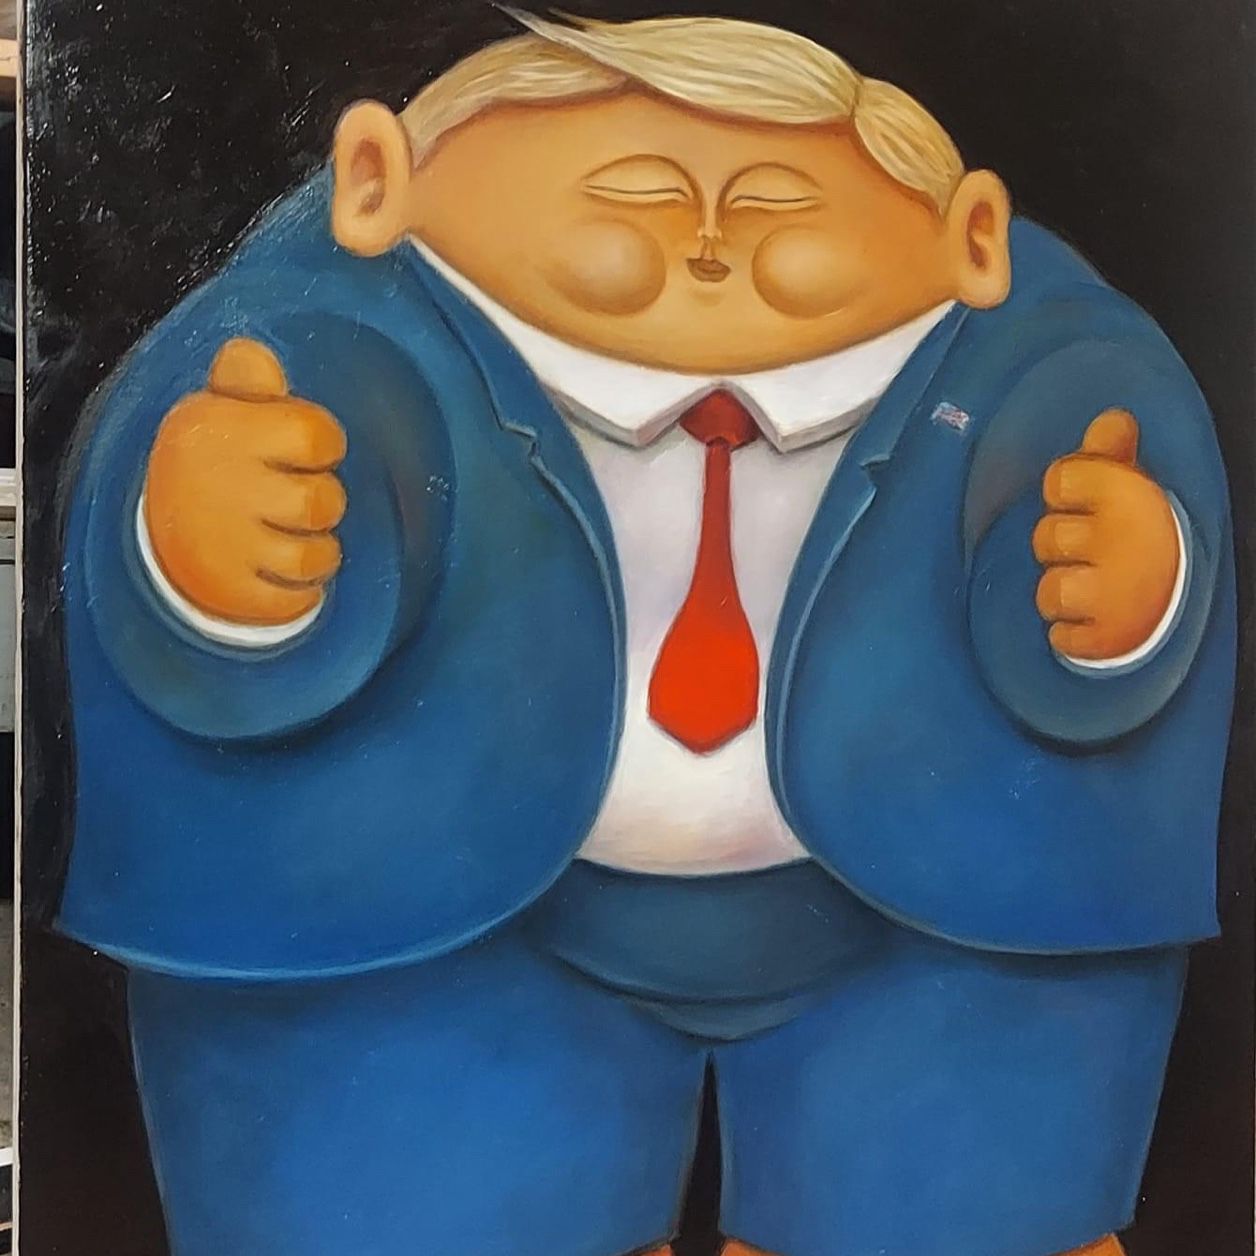 Newest Work By Cuban Artist Alberto Godoy For Those Looking For Trump Original 